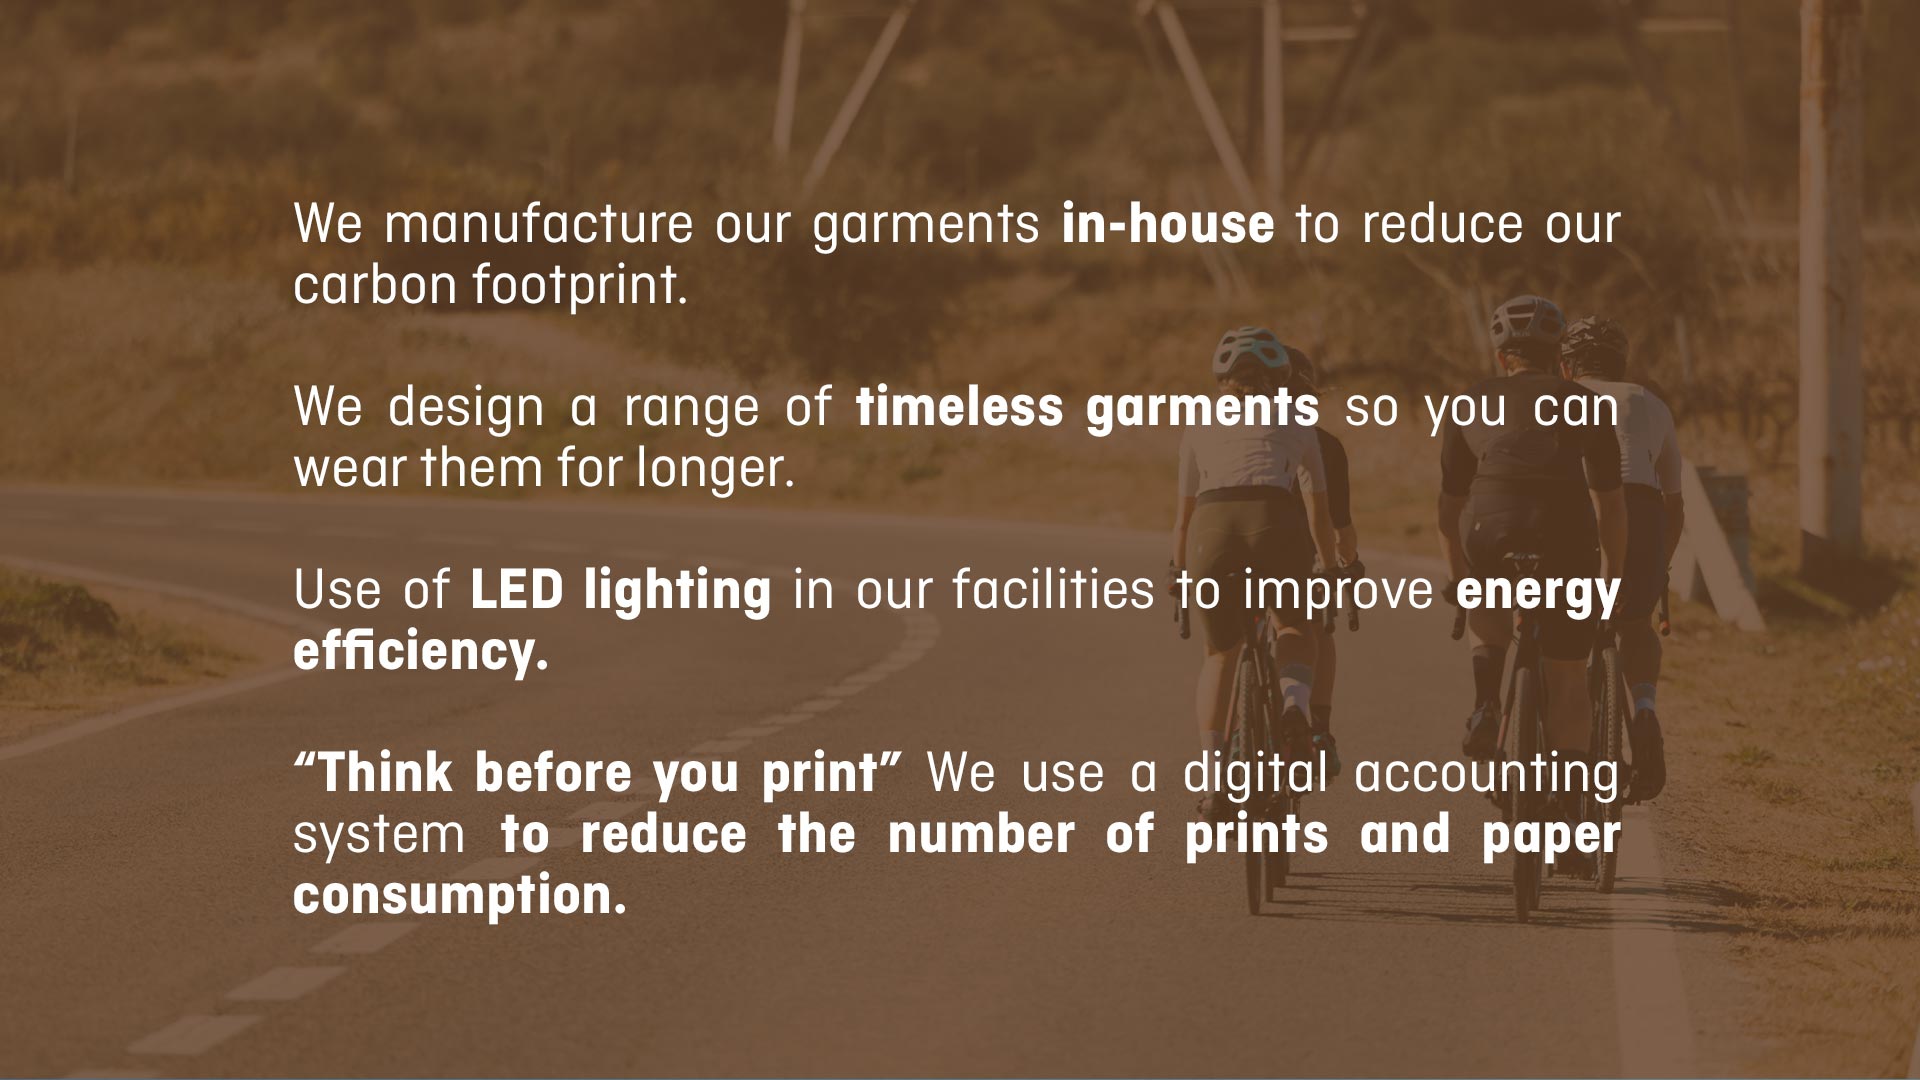 We manufacture our garments in-house to reduce our carbon footprint. Use of LED lighting in our facilities to improve energy efficiency.